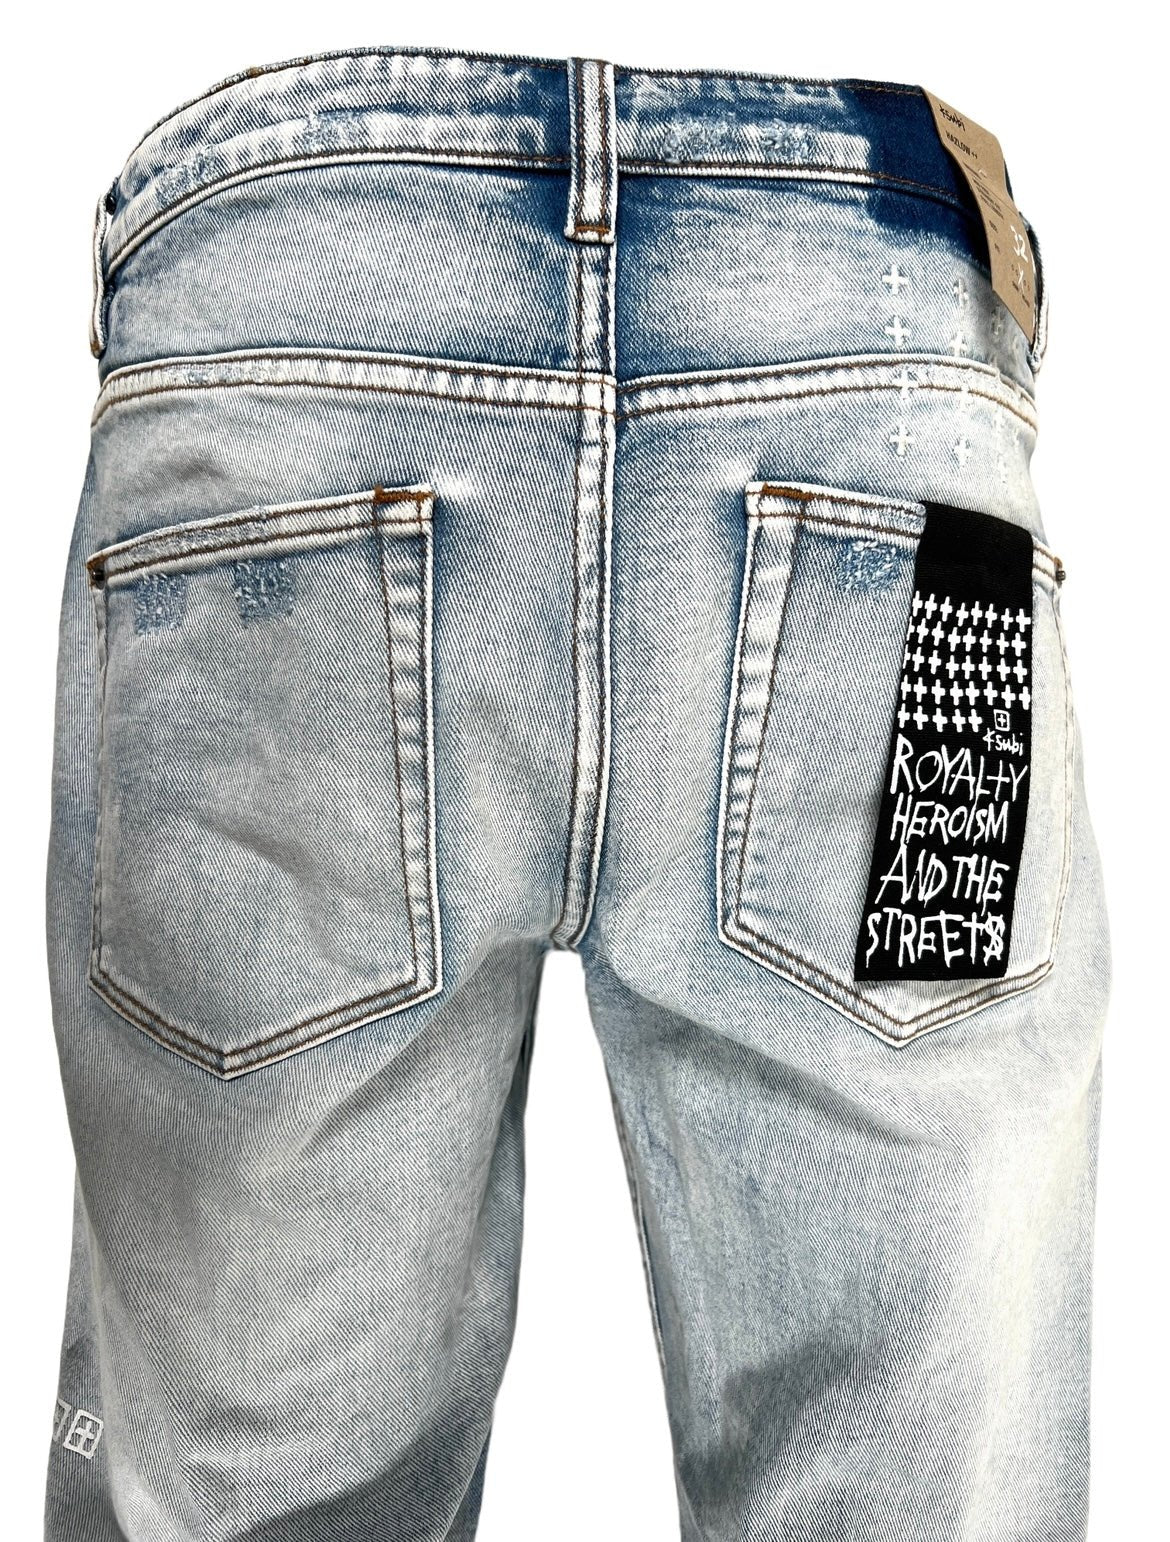 A pair of men's ripped jeans with a KSUBI HAZLOW CITY HIGH TRASHED DENIM tag on the back.